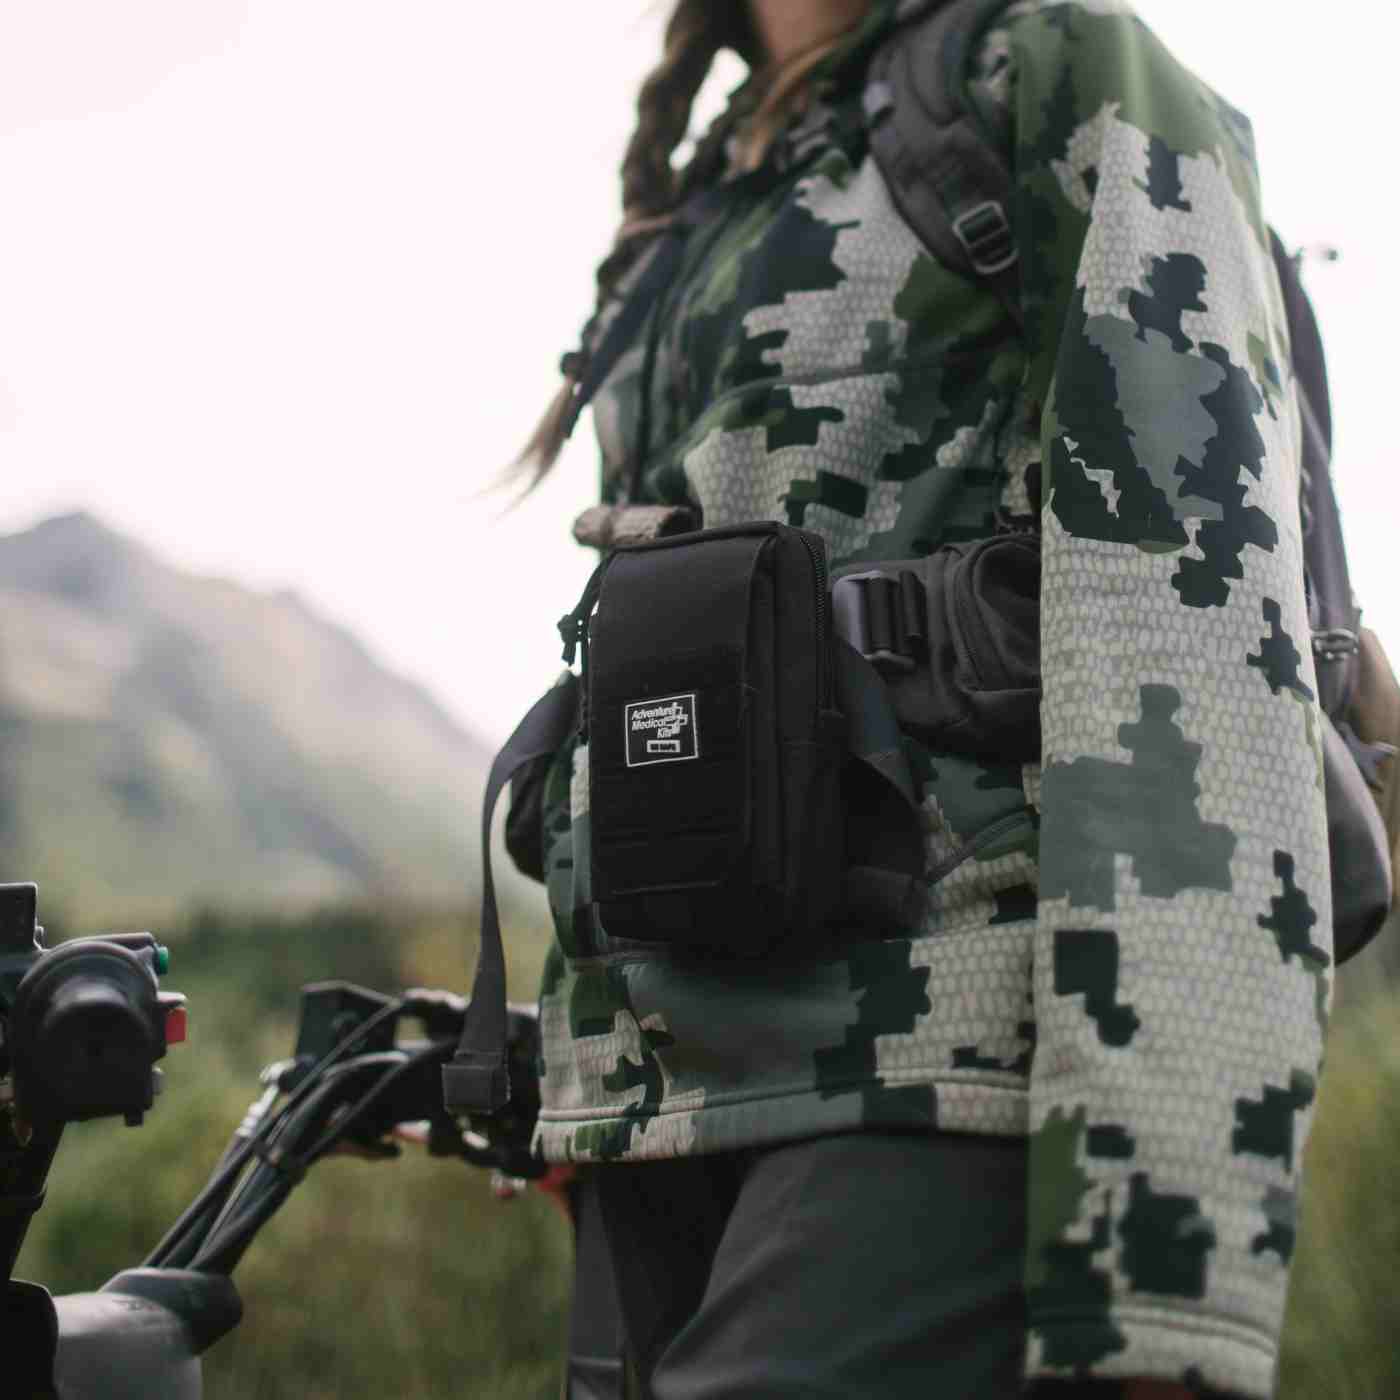 MOLLE Bag Trauma Kit 0.5 - Black on belt of woman in camo with mountains in background